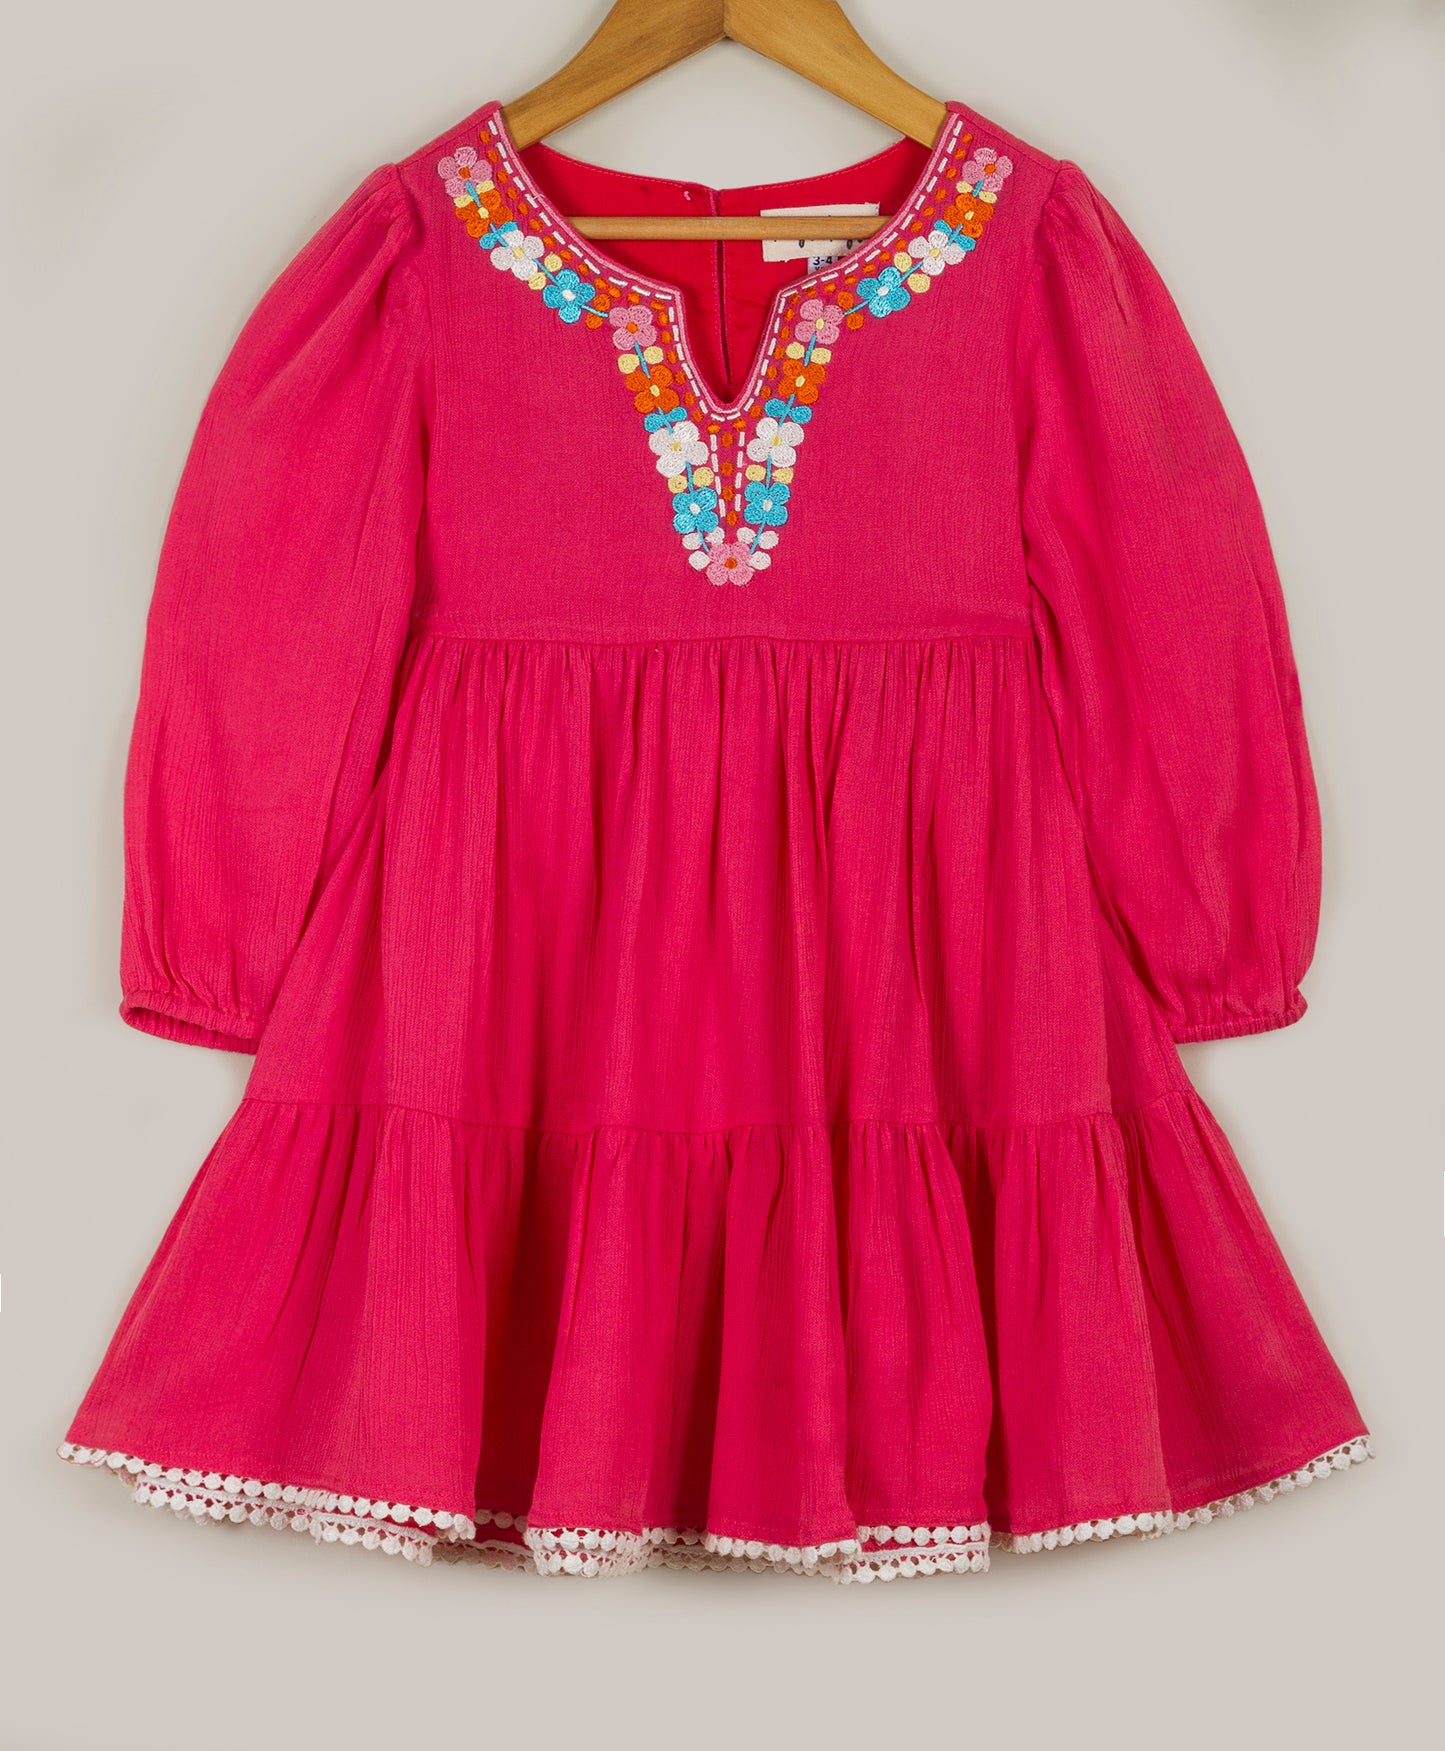 HOT PINK SOLID DRESS WITH MULTI FLORAL EMBROIDERY AT YOKE